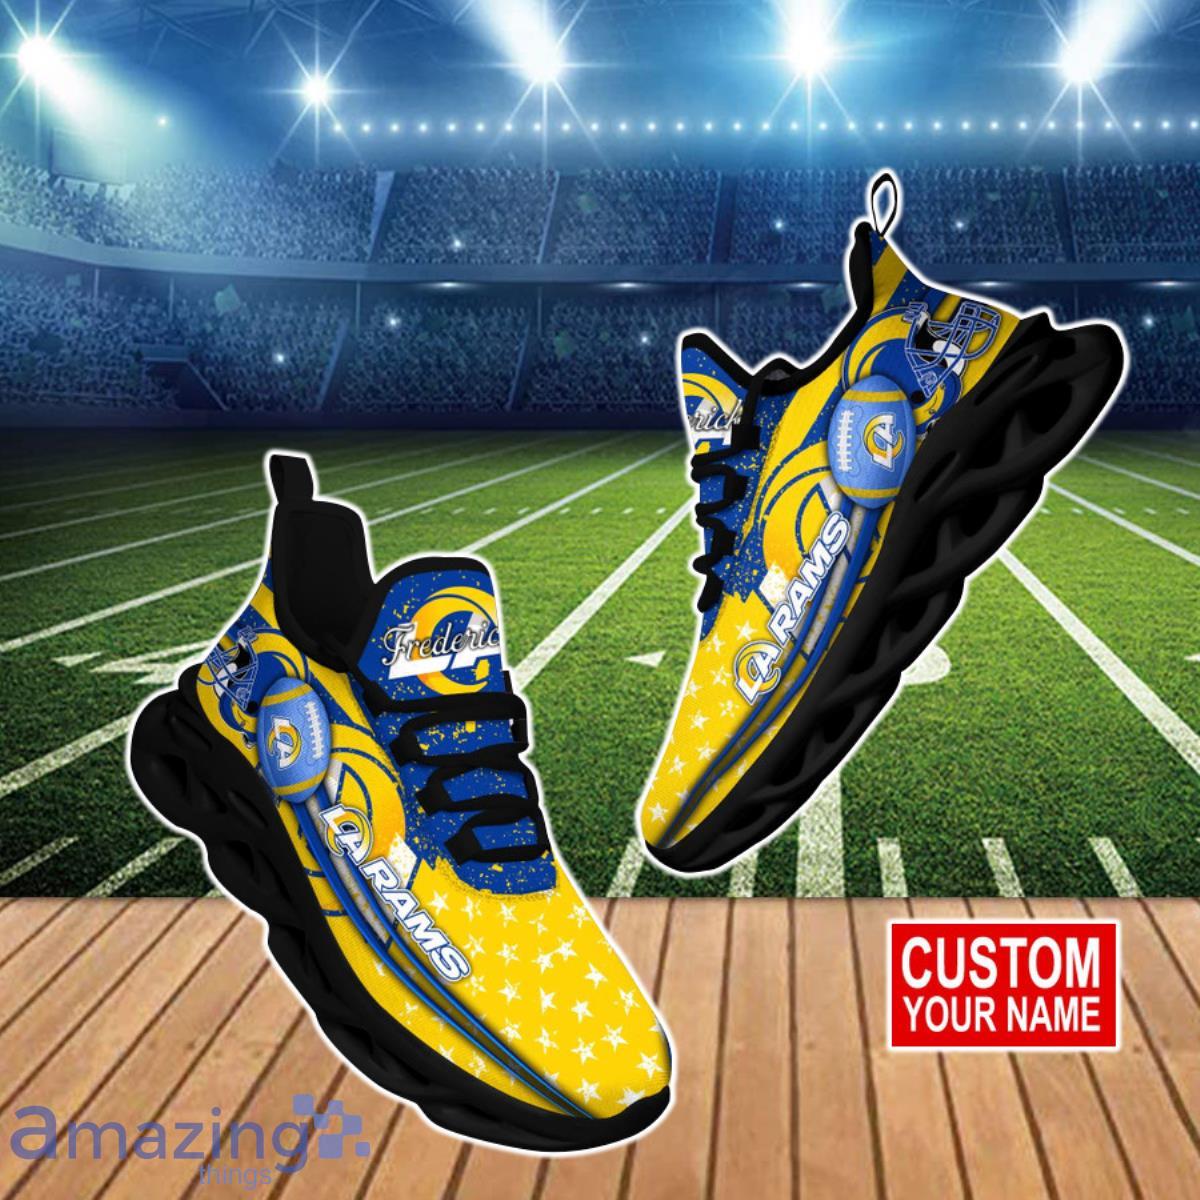 Los Angeles Rams NFL Clunky Max Soul Shoes Custom Name Special Gift For Men And Women Fans Product Photo 1